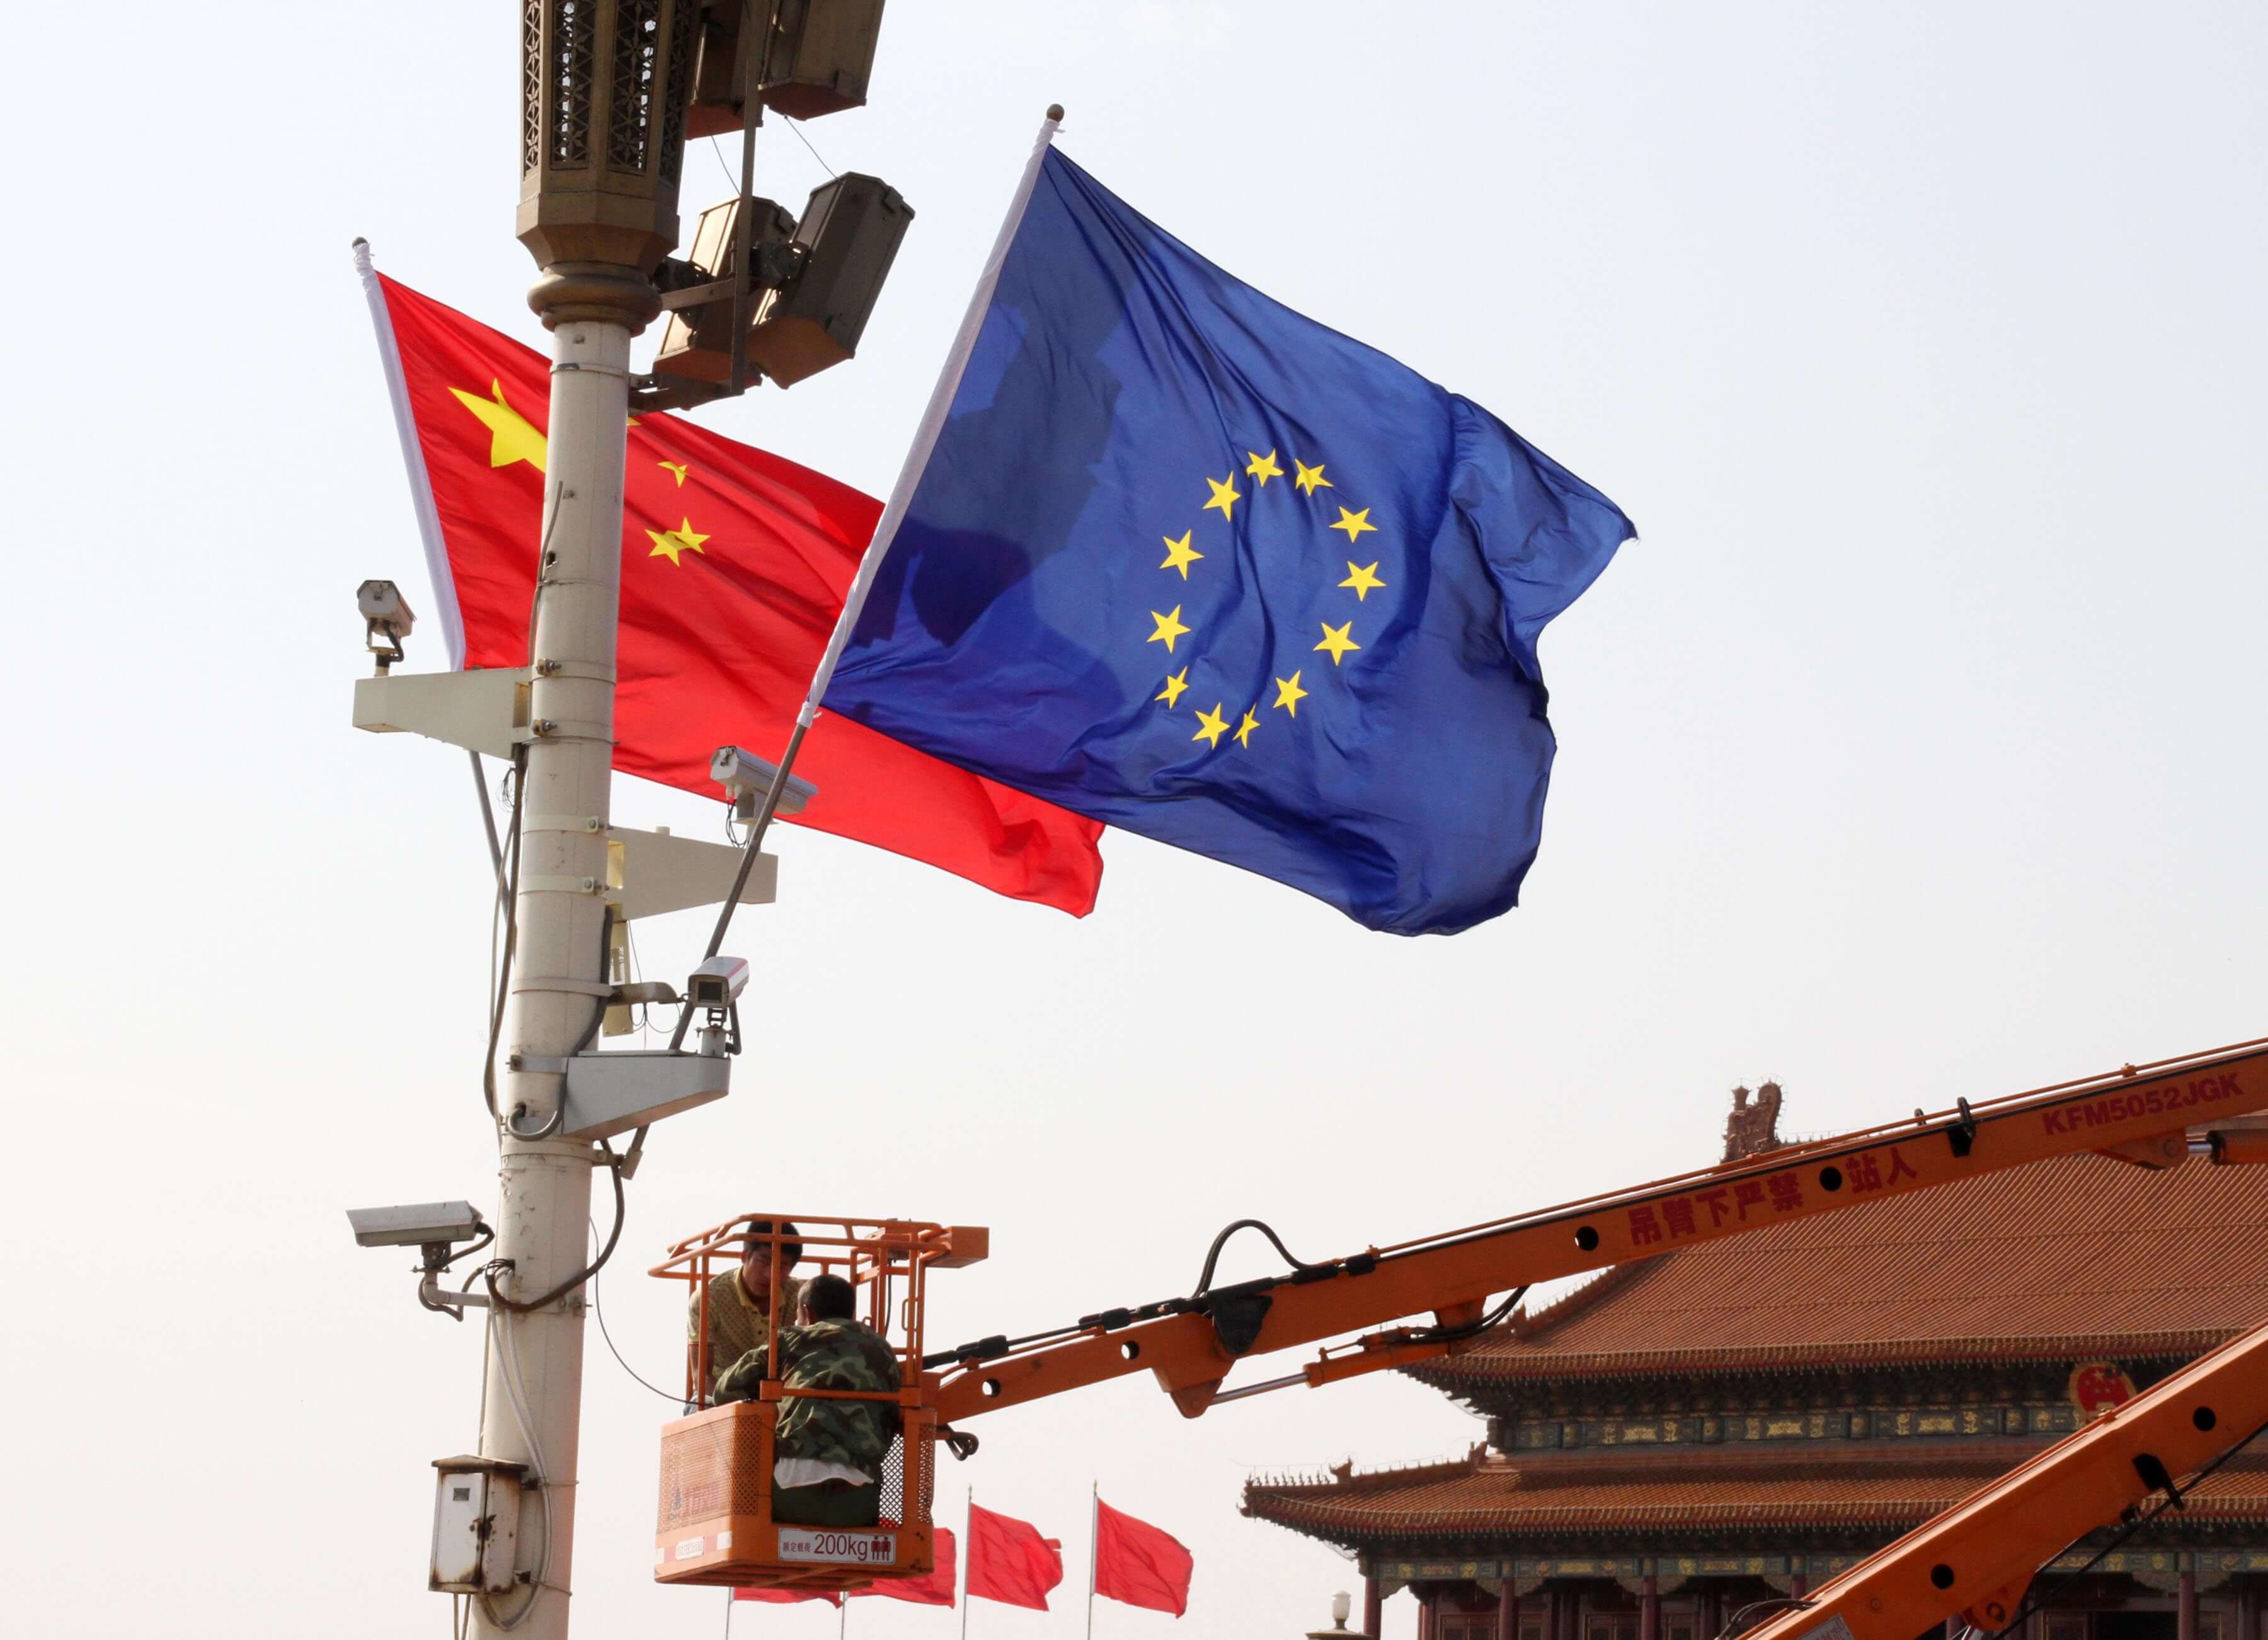 Dams - The Chinese National Flag and the Flag of Europe flutter on a lamppost above CCTV cameras on Tiananmen Square in Beijing, China, 16 May 2011. Reuters